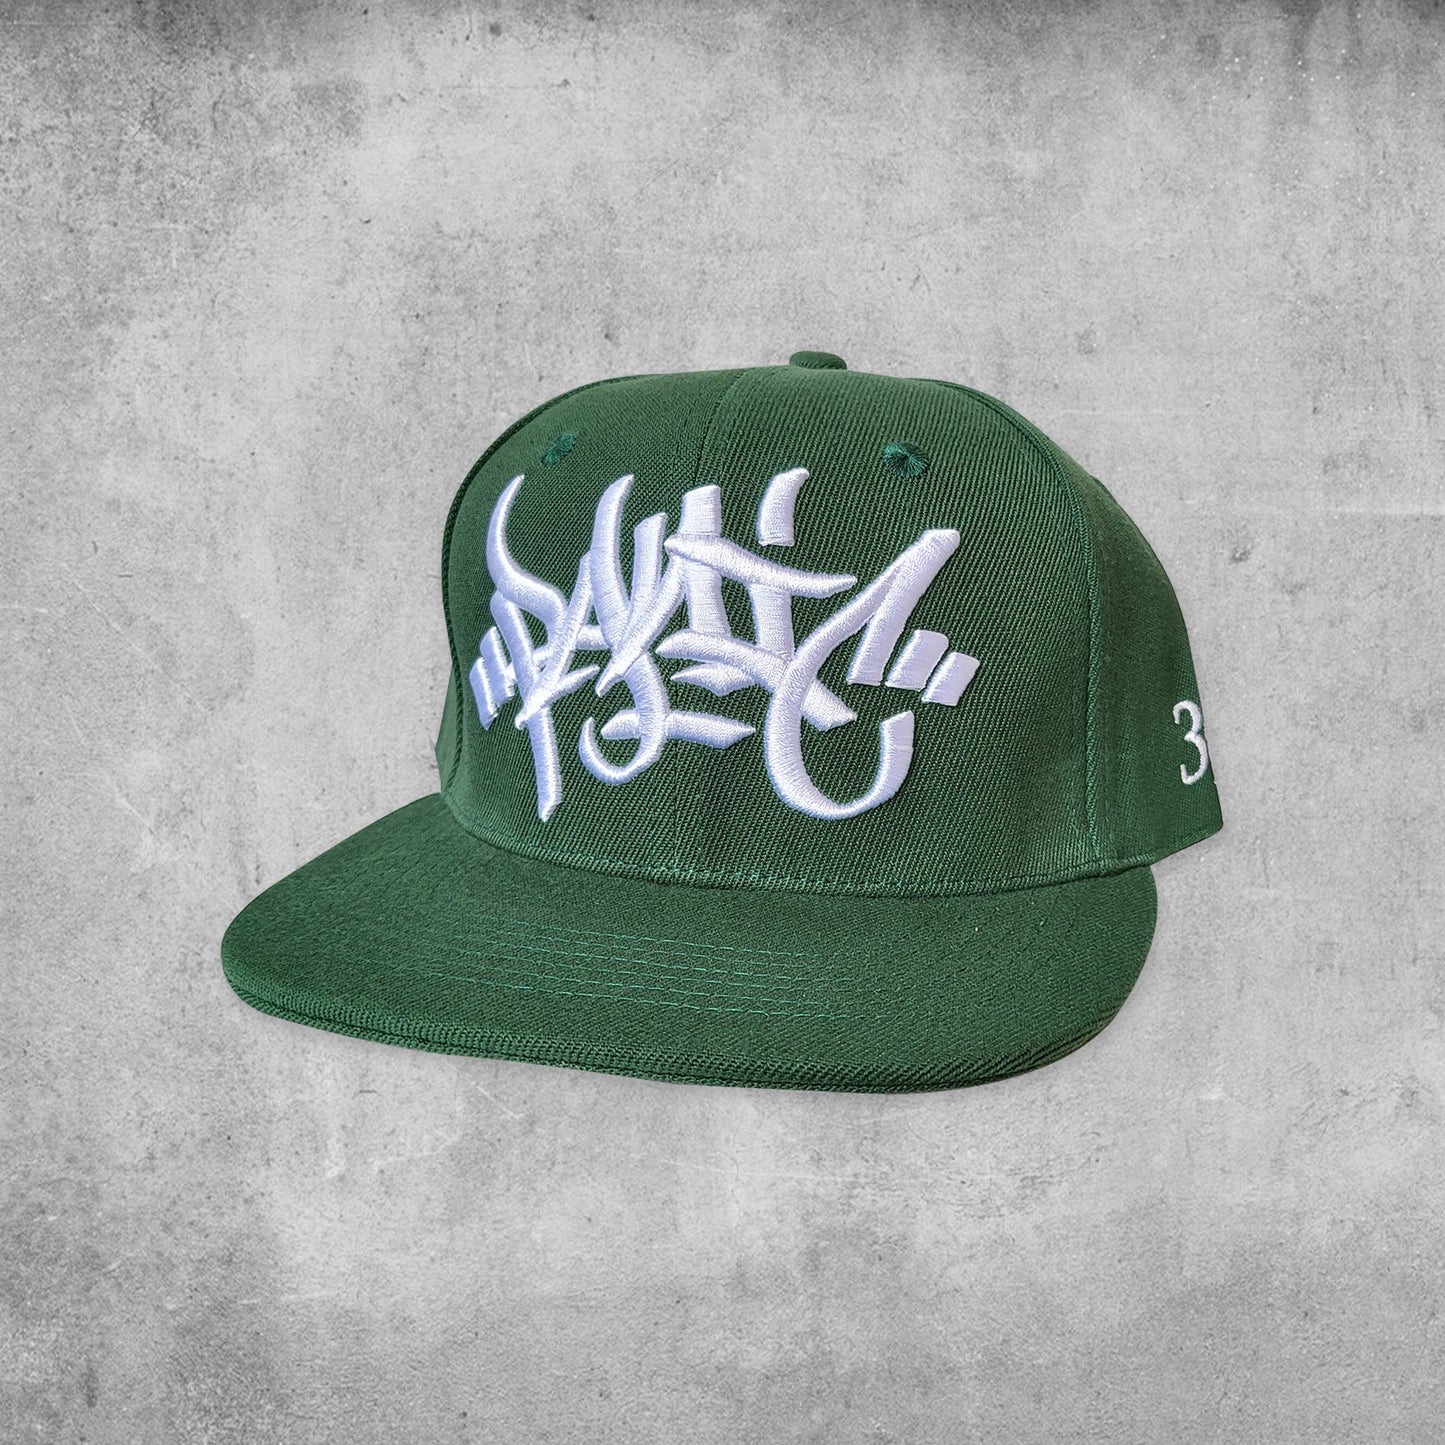 Panic 39 branded snap back hat in green with white puff embroidery.